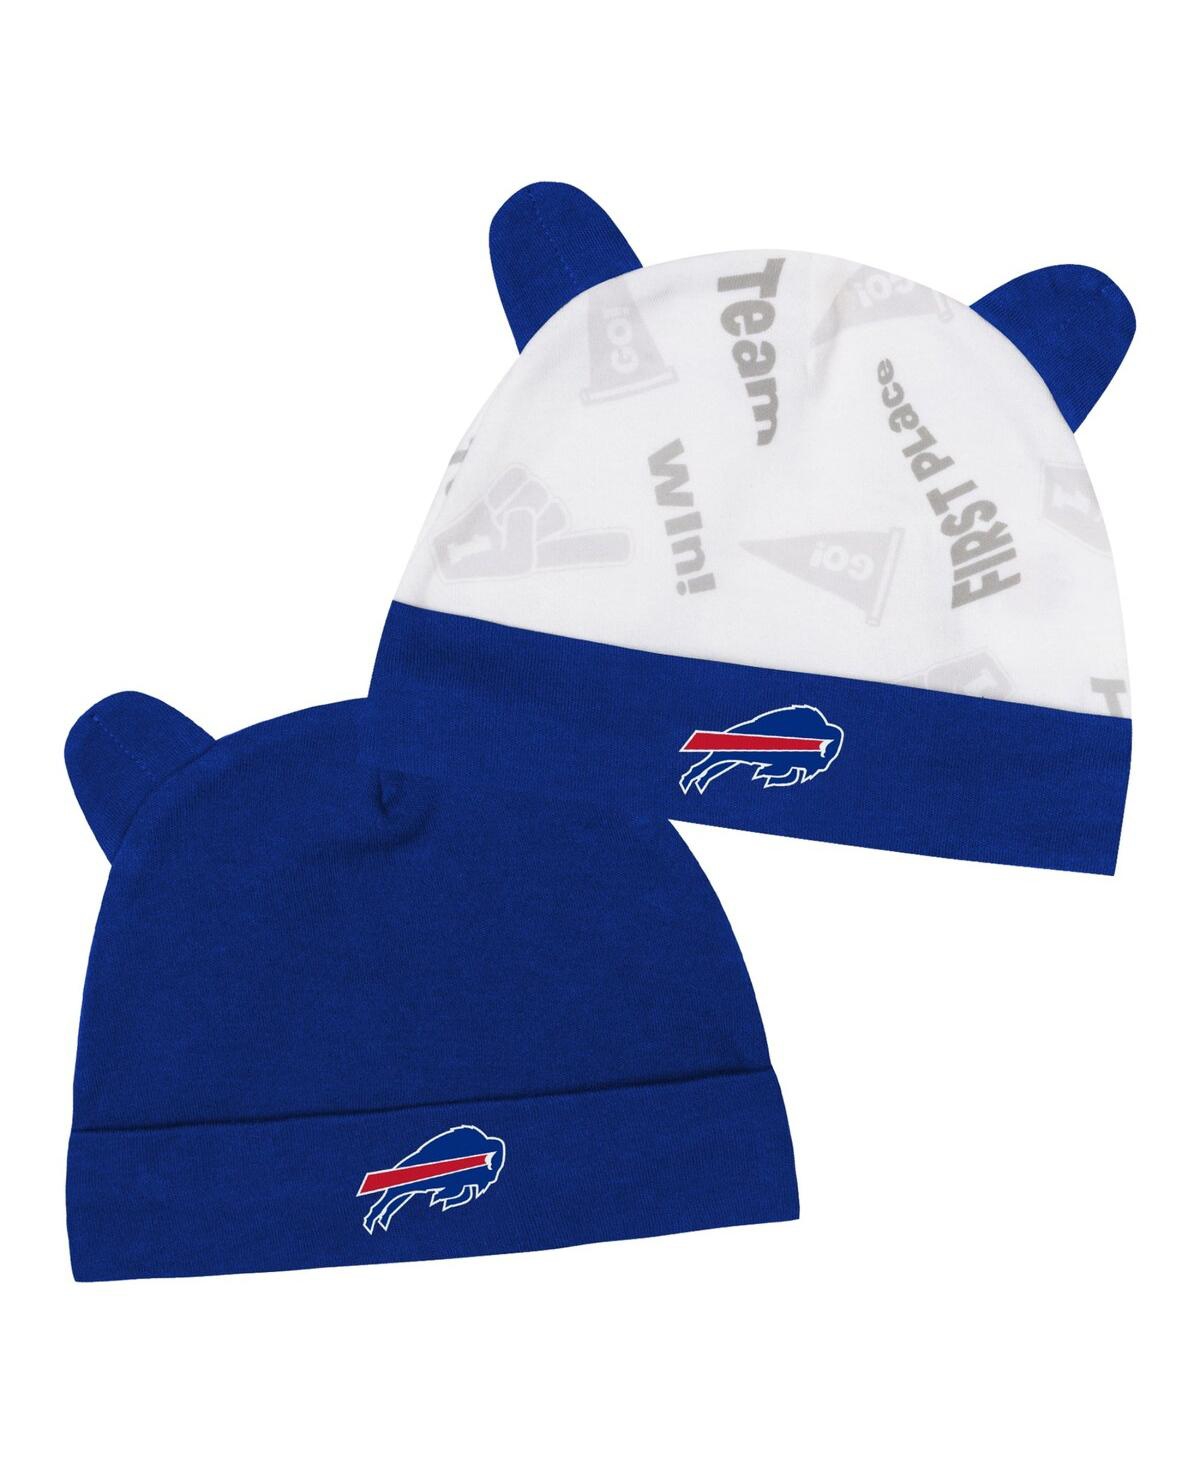 Shop Outerstuff Infant Boys And Girls Royal, White Buffalo Bills Baby Bear Cuffed Knit Hat Set In Royal,white